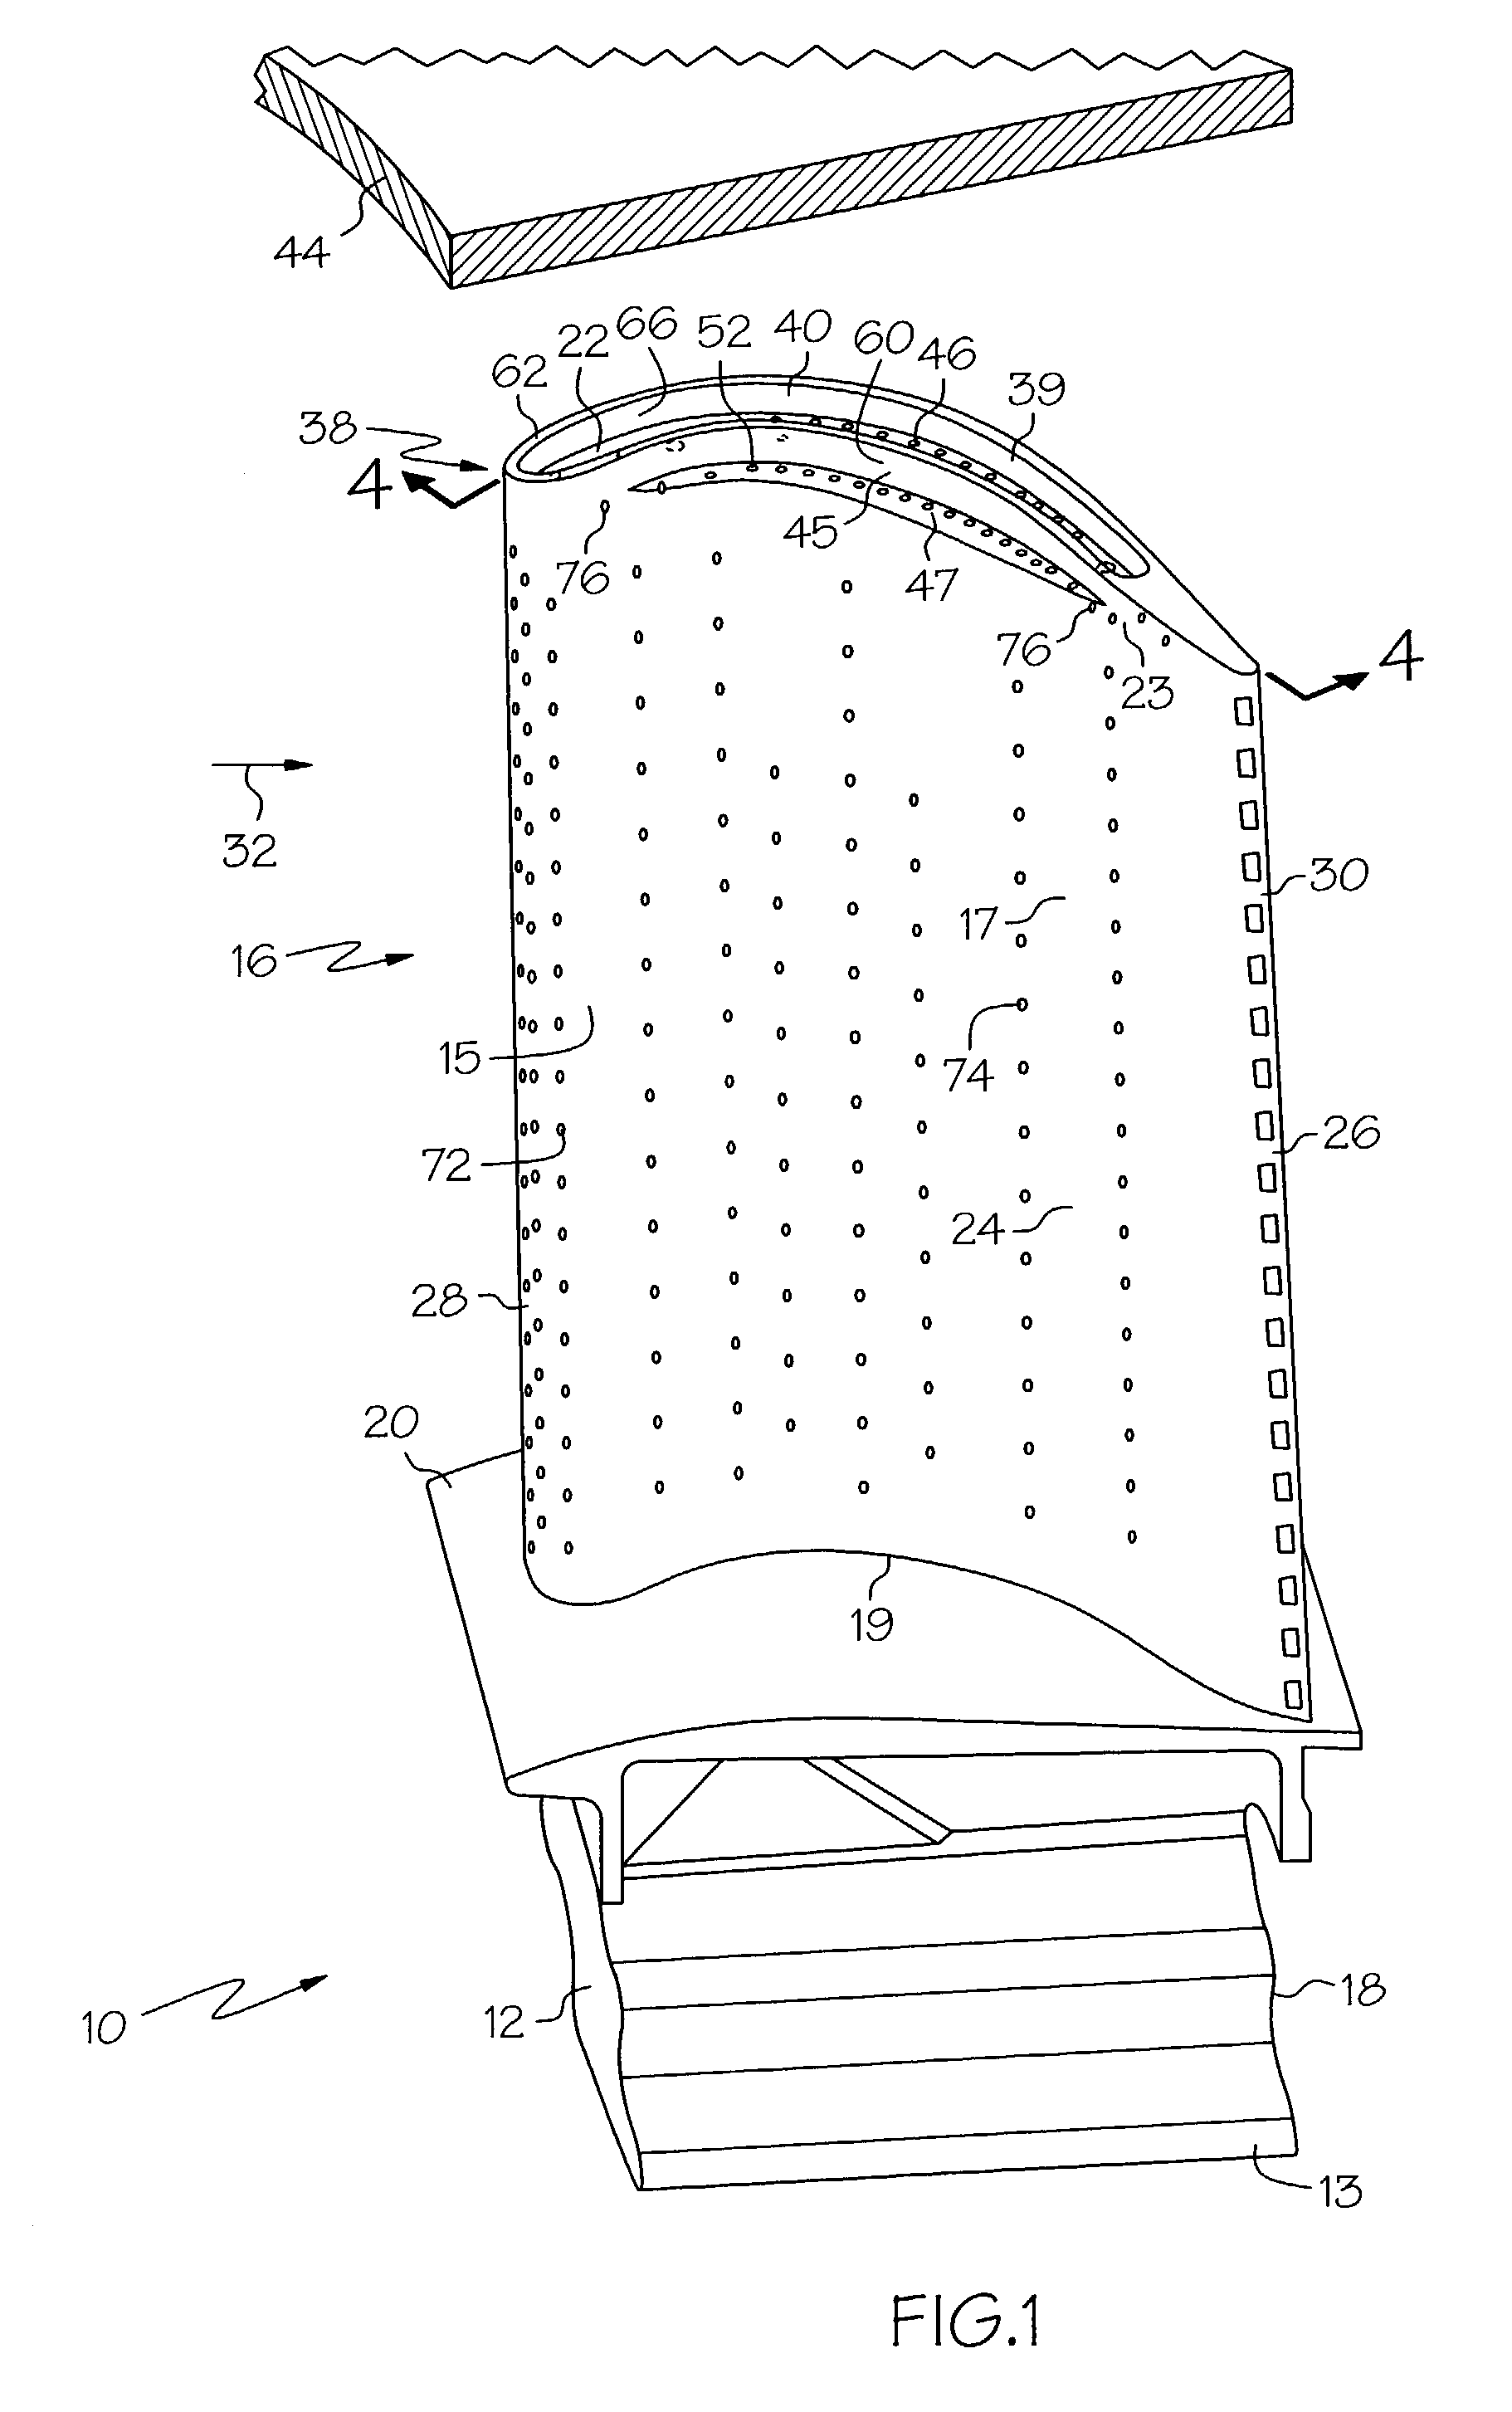 Turbine blade with recessed squealer tip and shelf